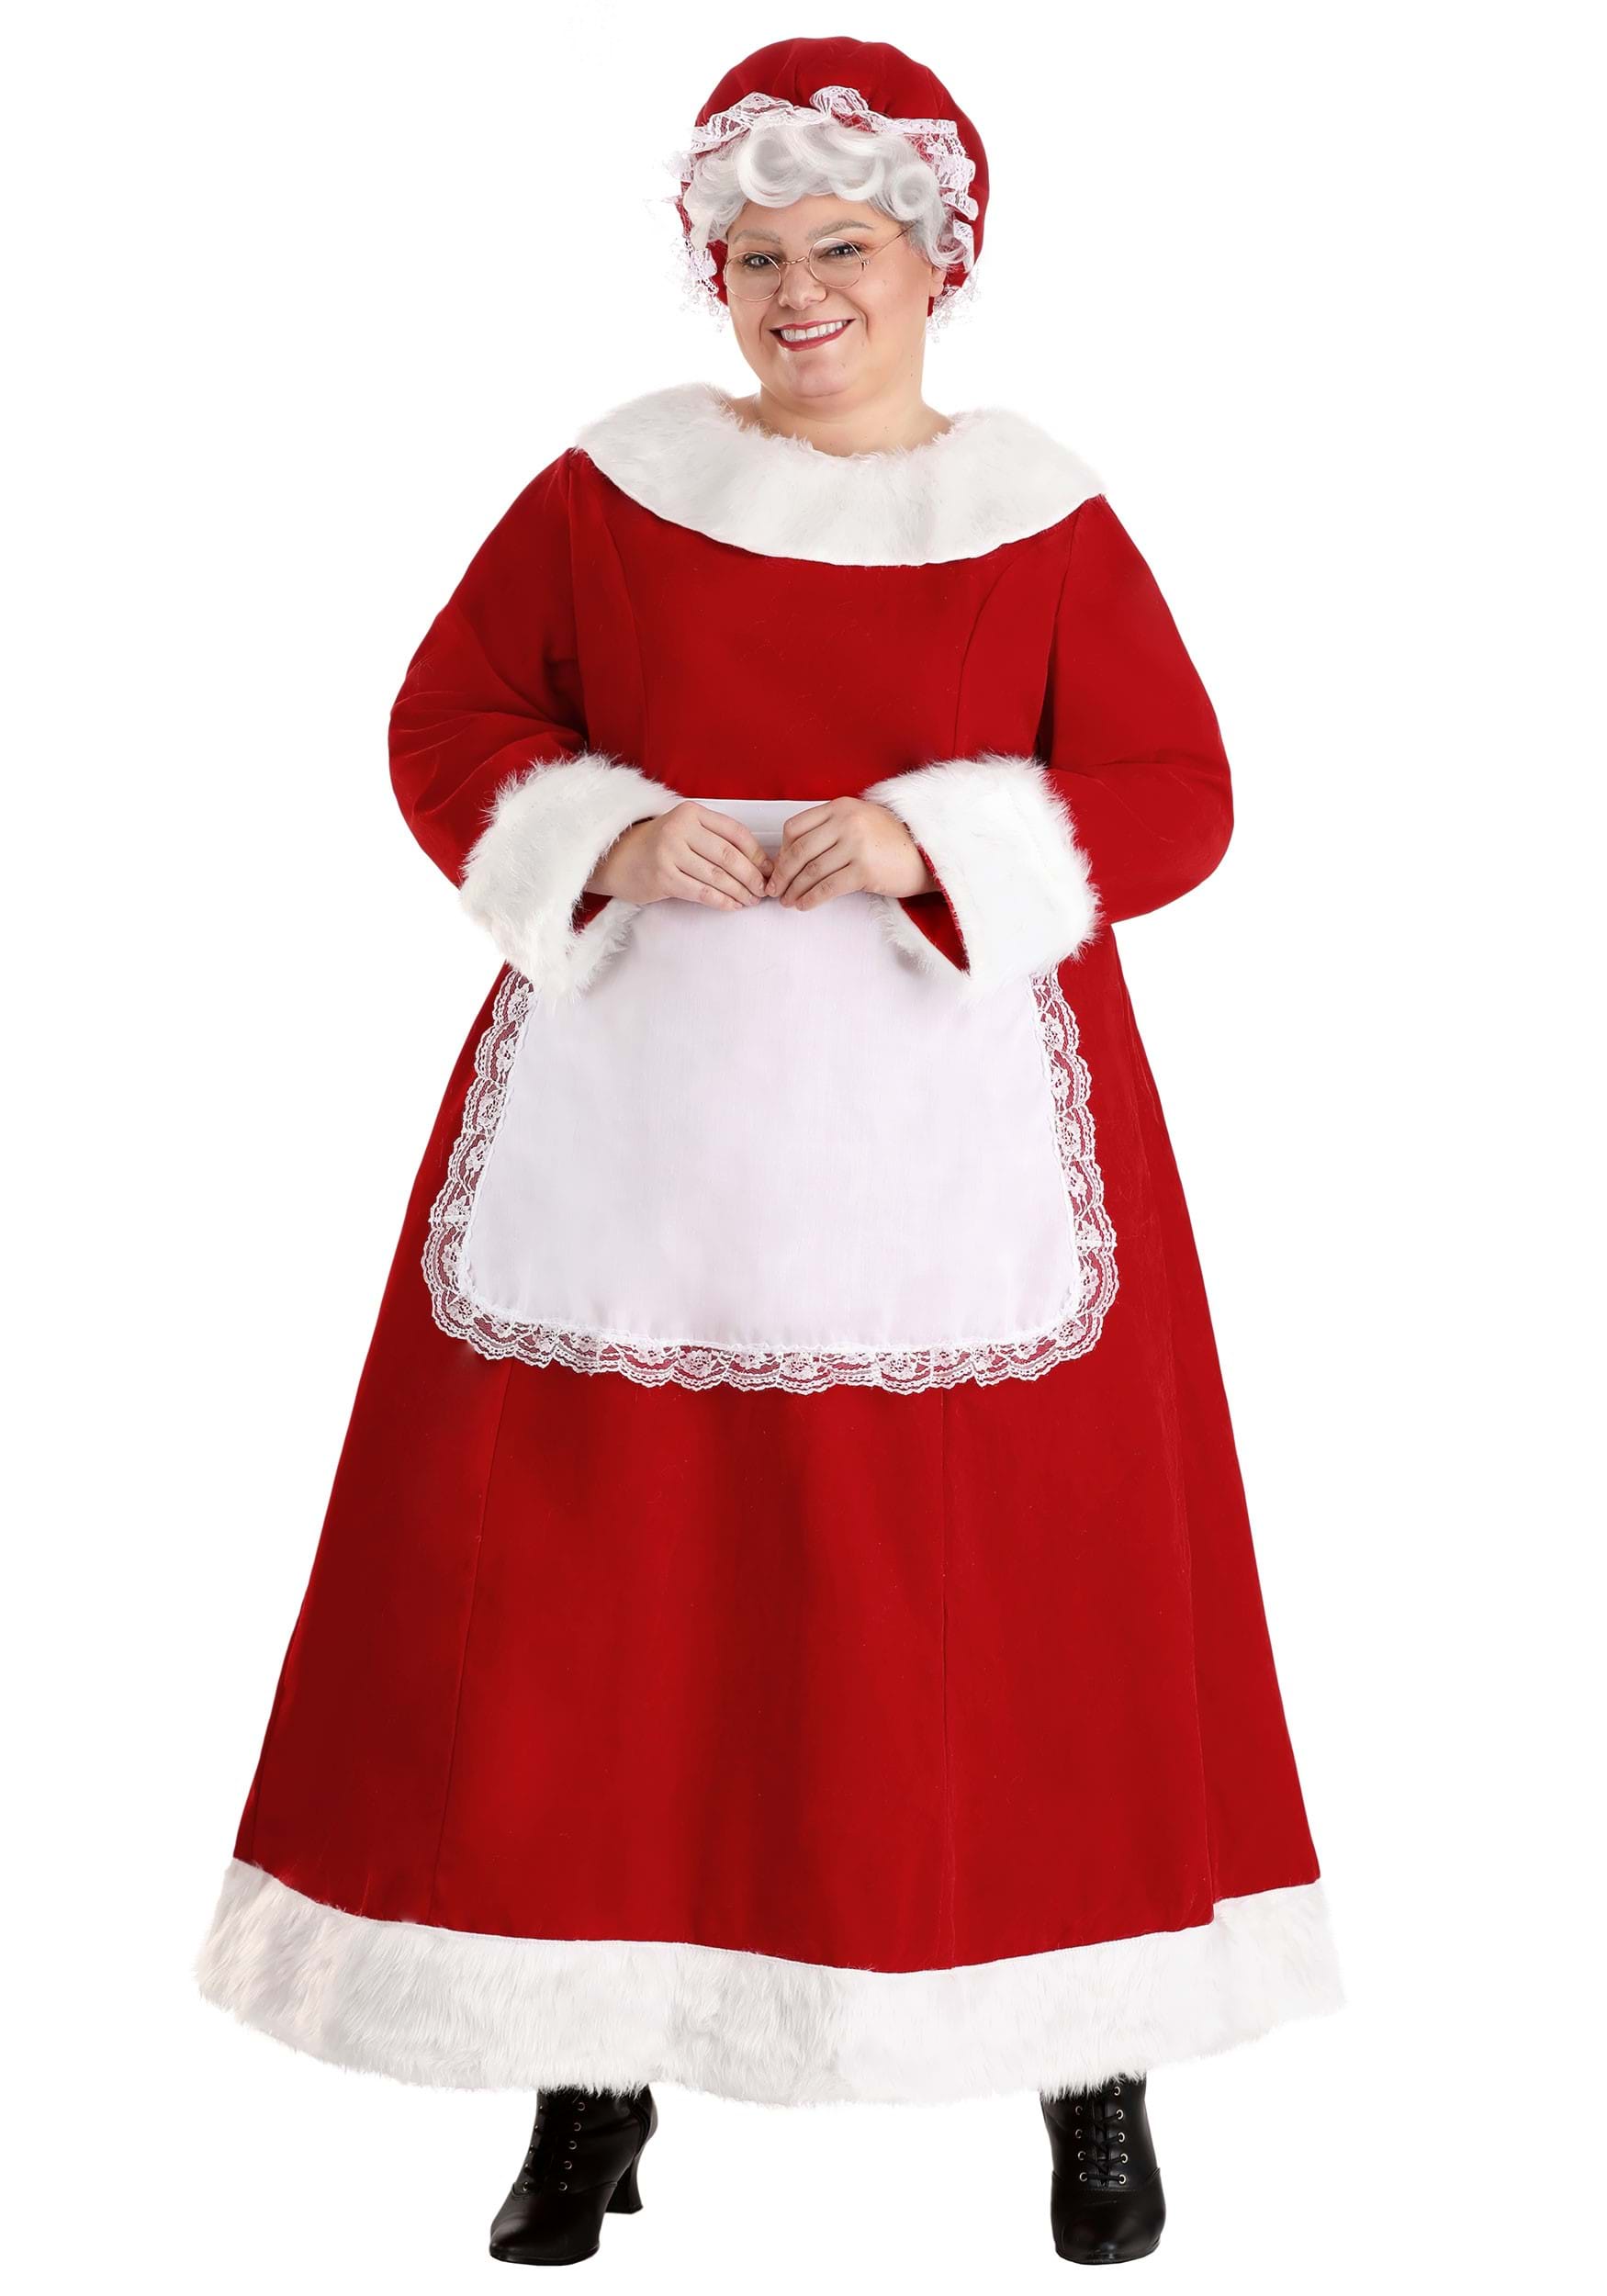 Photos - Fancy Dress Deluxe FUN Costumes Plus Size Mrs. Claus Costume for Women Red FUN2056PL 